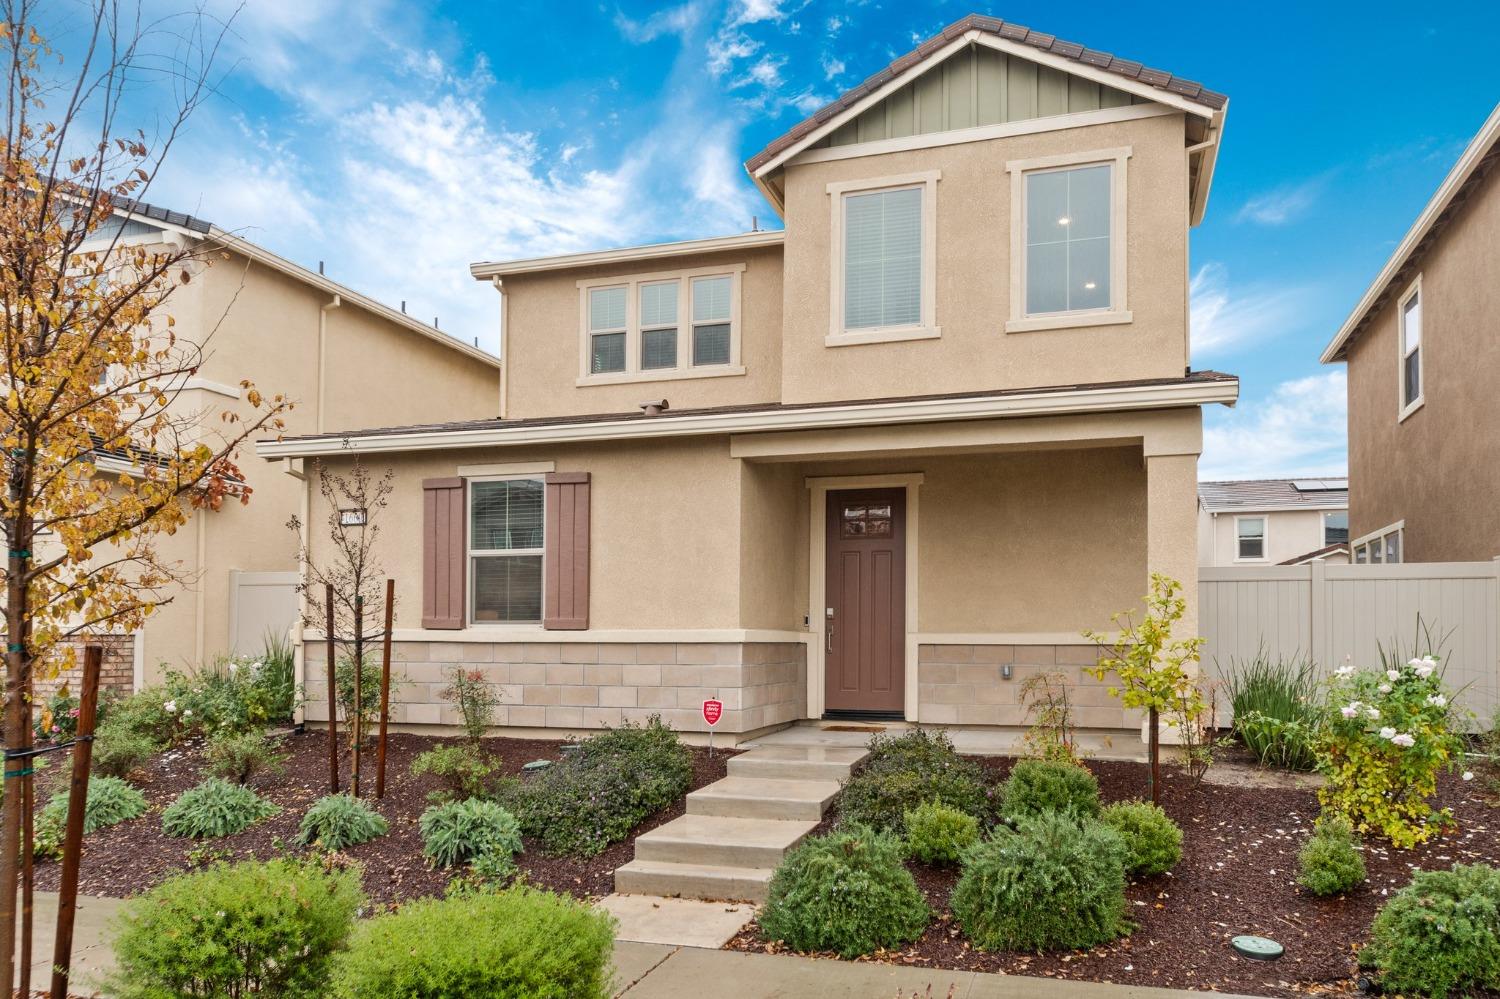 Built in 2019, this immaculate four-bedroom three-bathroom Natomas Meadows smart-home is centrally l